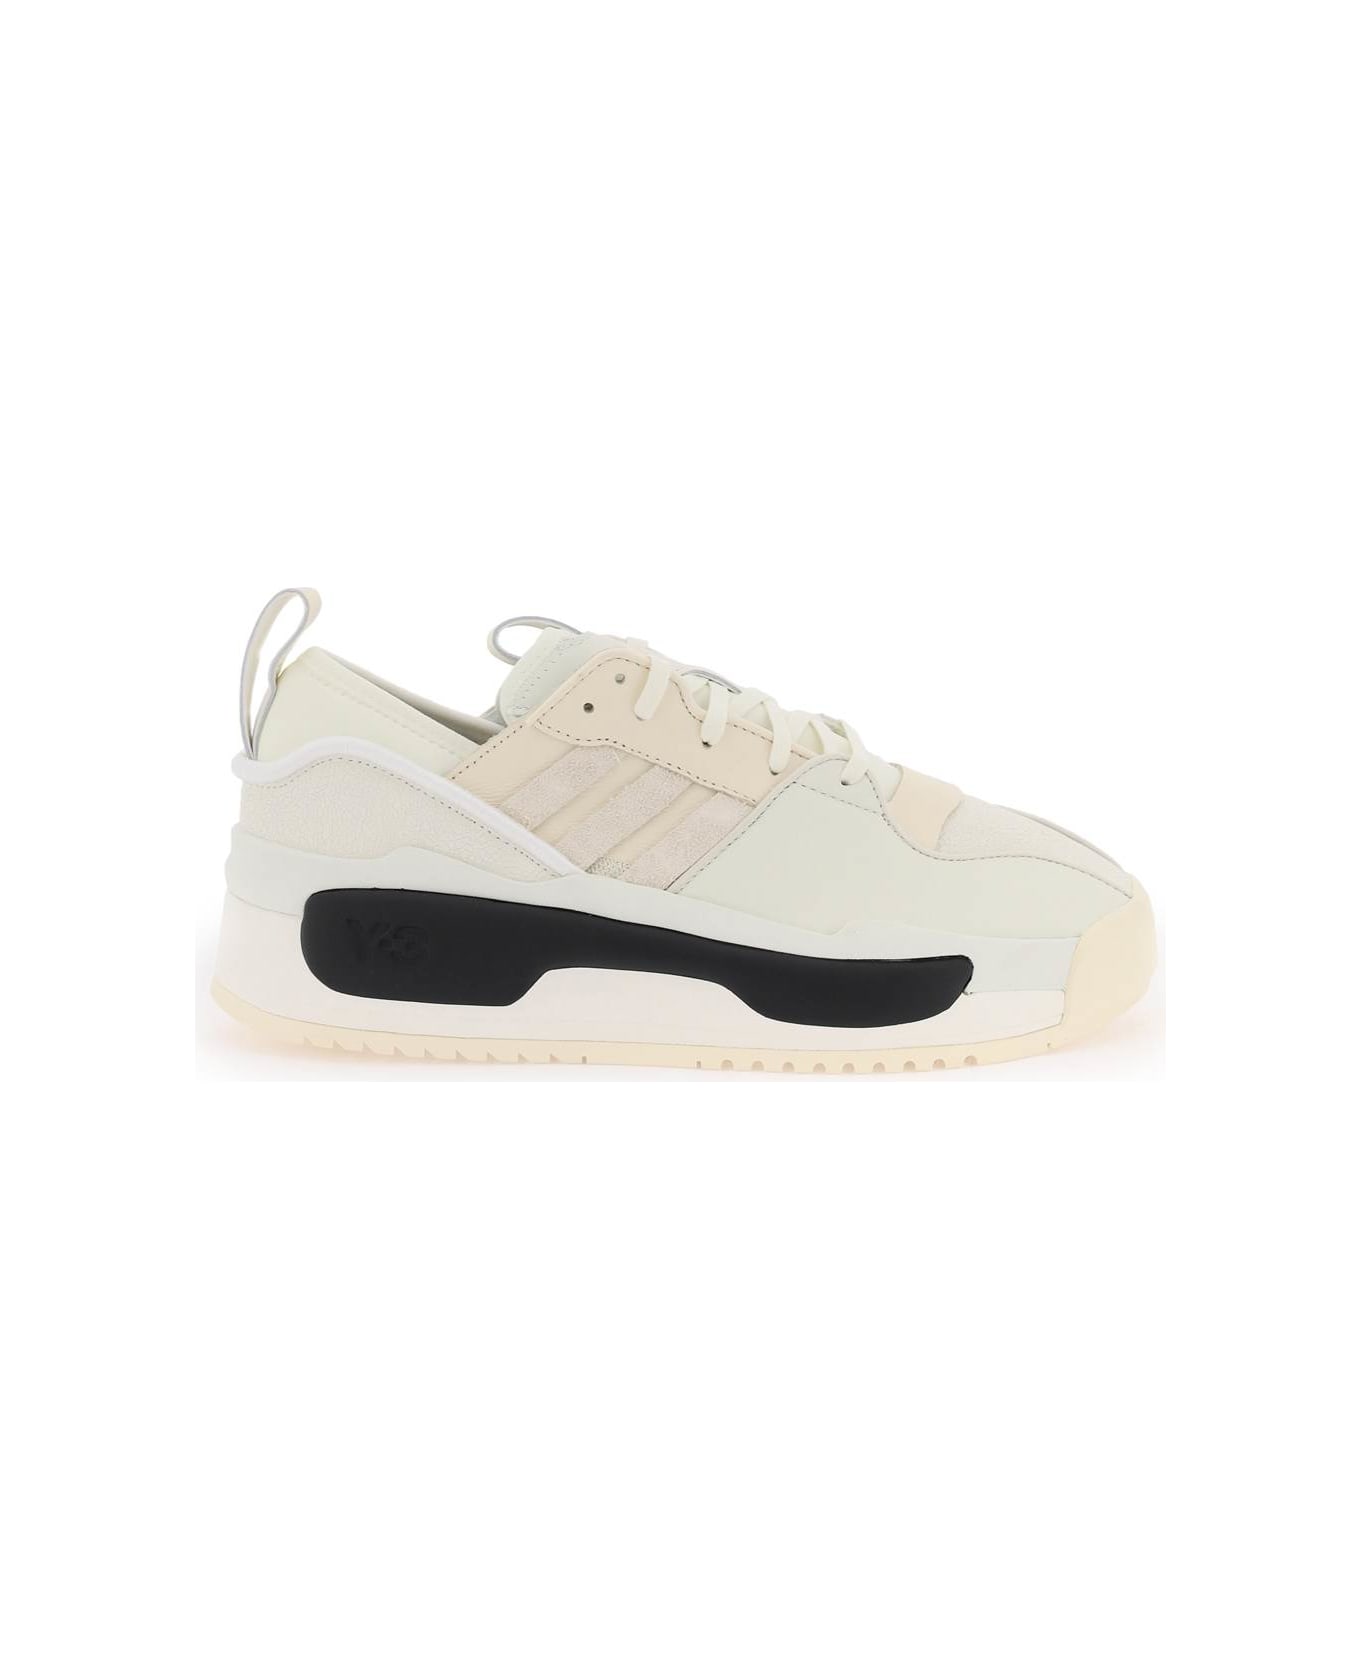 Y-3 Rivalry Sneakers - OFF WHITE WONDER WHITE (White) スニーカー